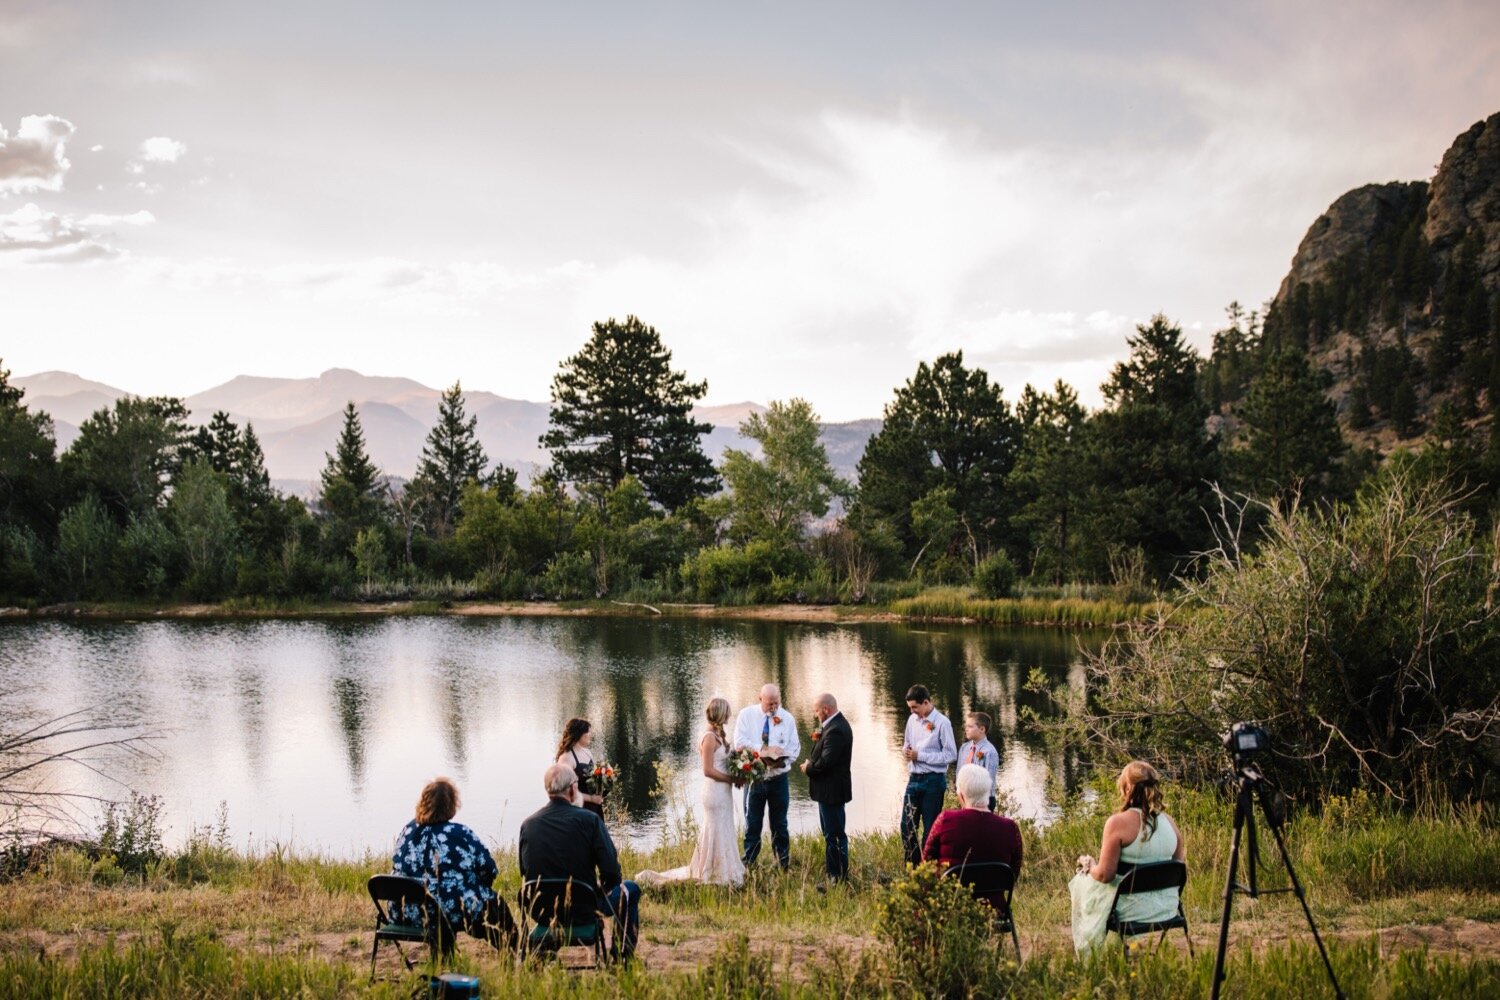  Sunset elopement ceremony, Estes Park Wedding Planner, Cheley Lodge and Grove, Cheley Colorado Camps, Colorado Wedding, Colorado Elopement, Wedding Planning, Wedding Inspiration, Wedding ideas, Elopement Planning, Elopement Inspiration, Elopement id